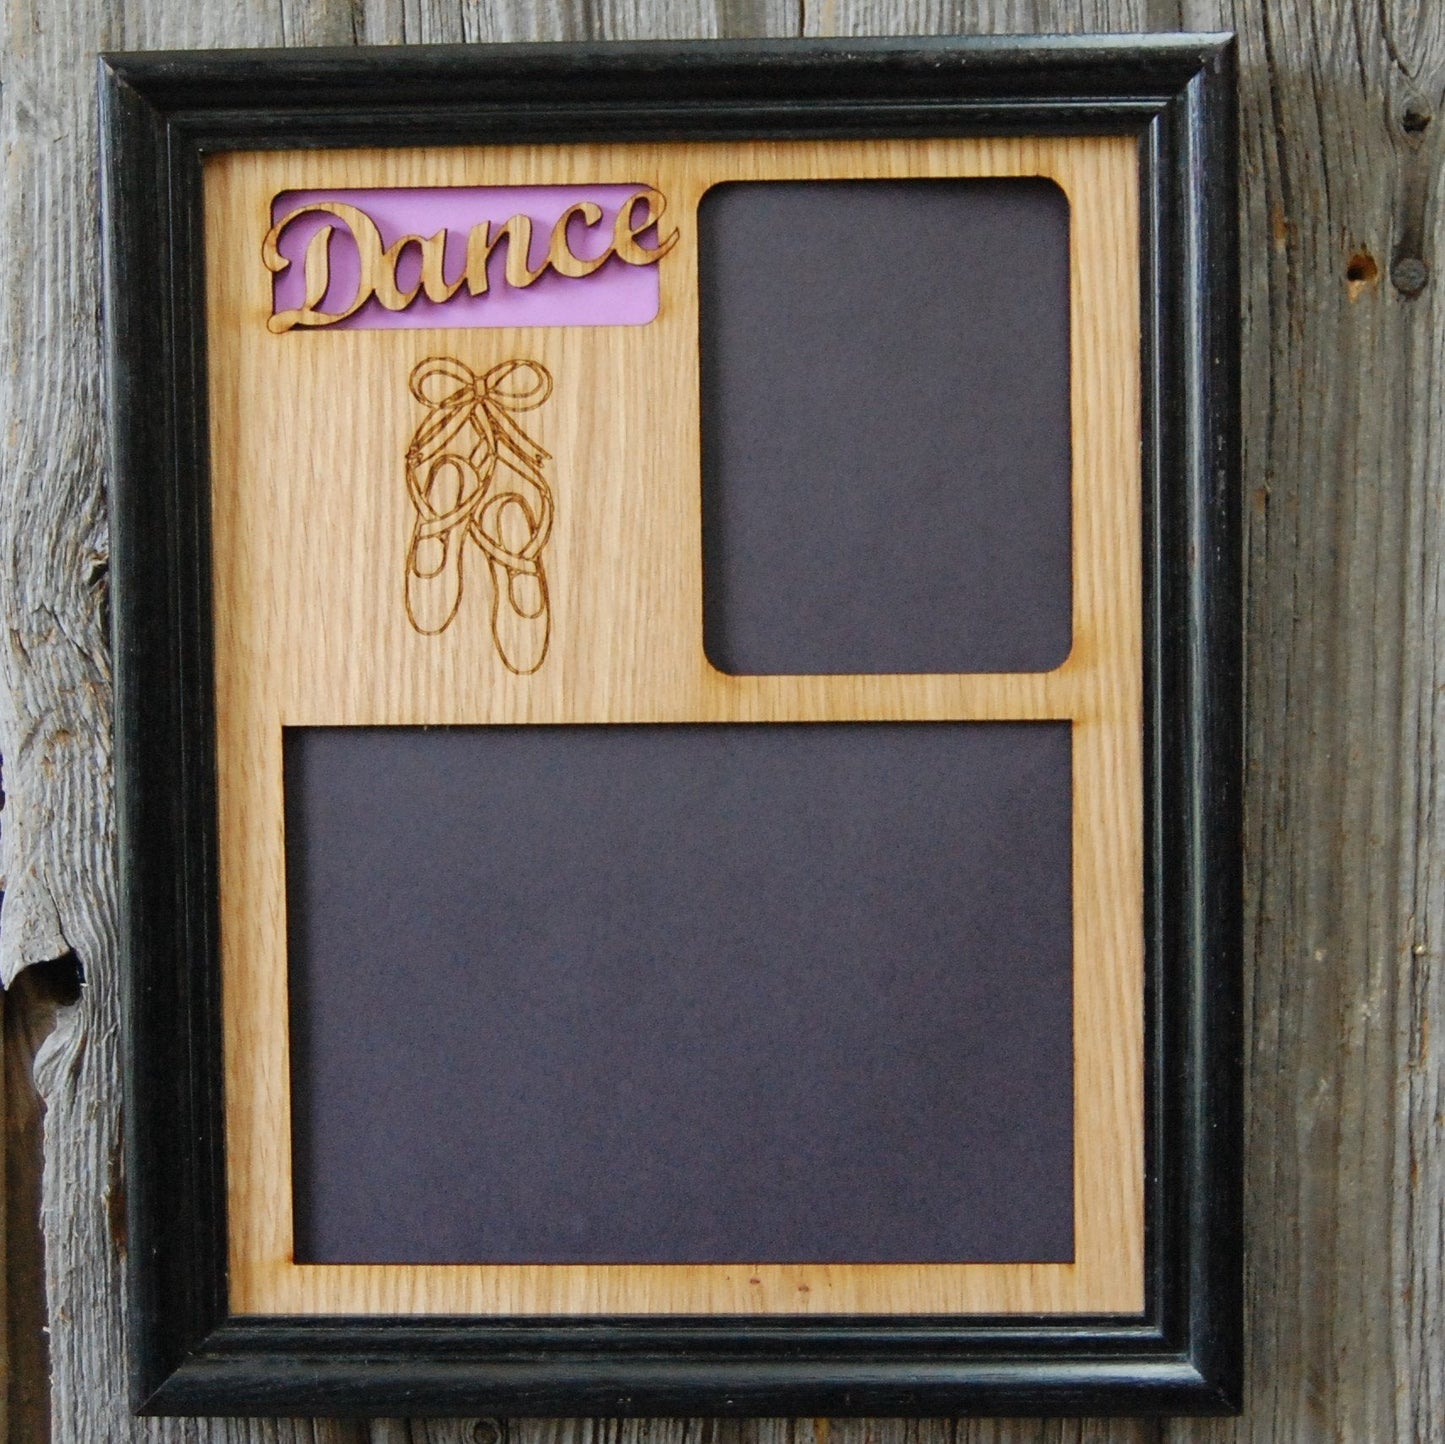 Dance Picture Frame - Dance Picture Frame - 8x10 Sports Picture Frame, Picture Frame, home decor, laser engraved - Legacy Images - Legacy Images - Picture Frames - Legacy Images - Picture Frames